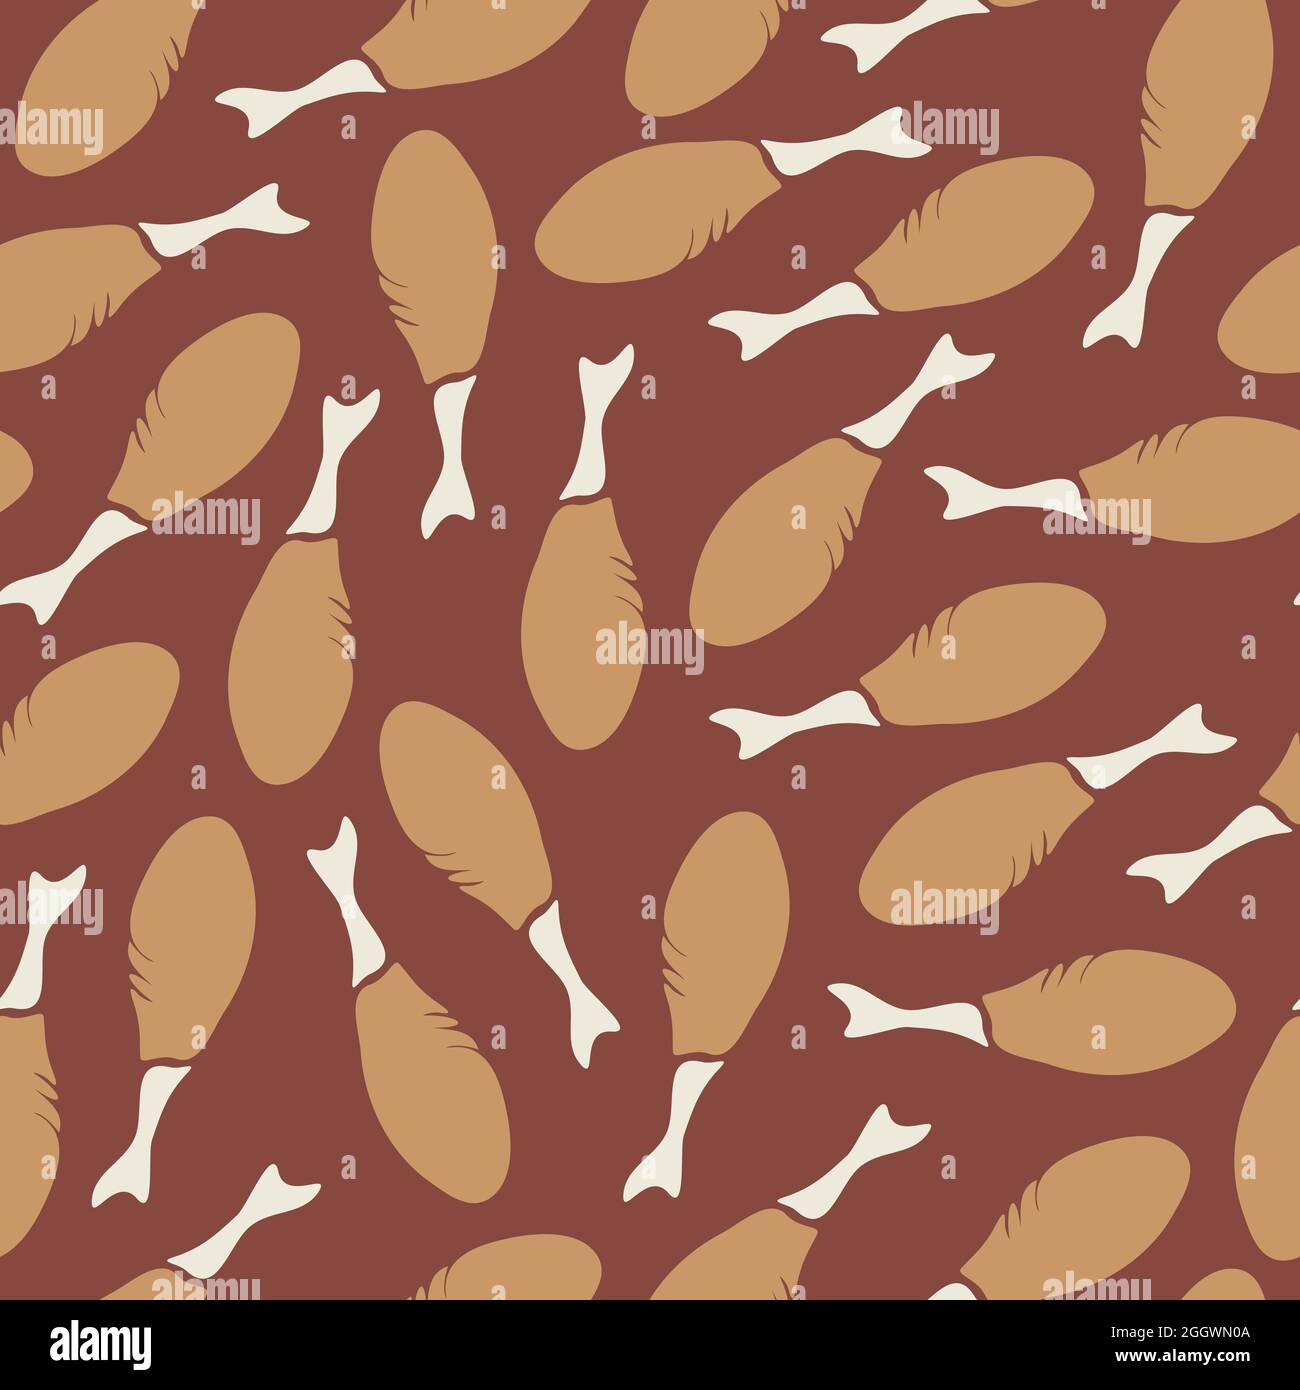 Vector seamless pattern with chicken legs. Design with silhouettes of hand drawn chicken legs. Stock Vector